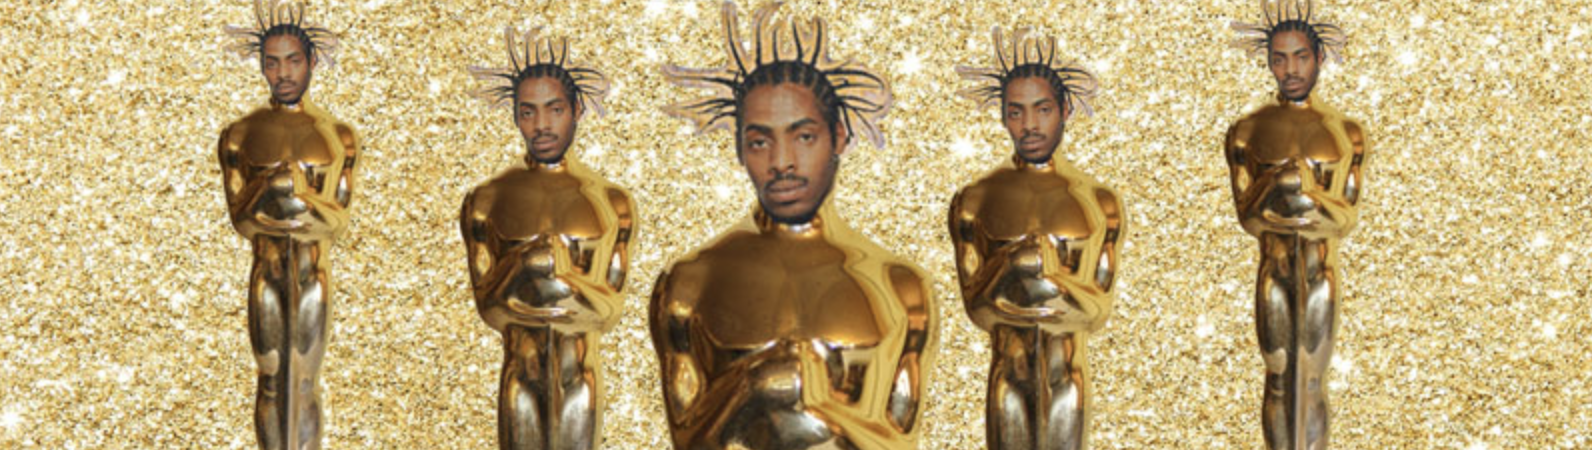 Coolio Awards: The Best and Worst of 2018 Pop Culture